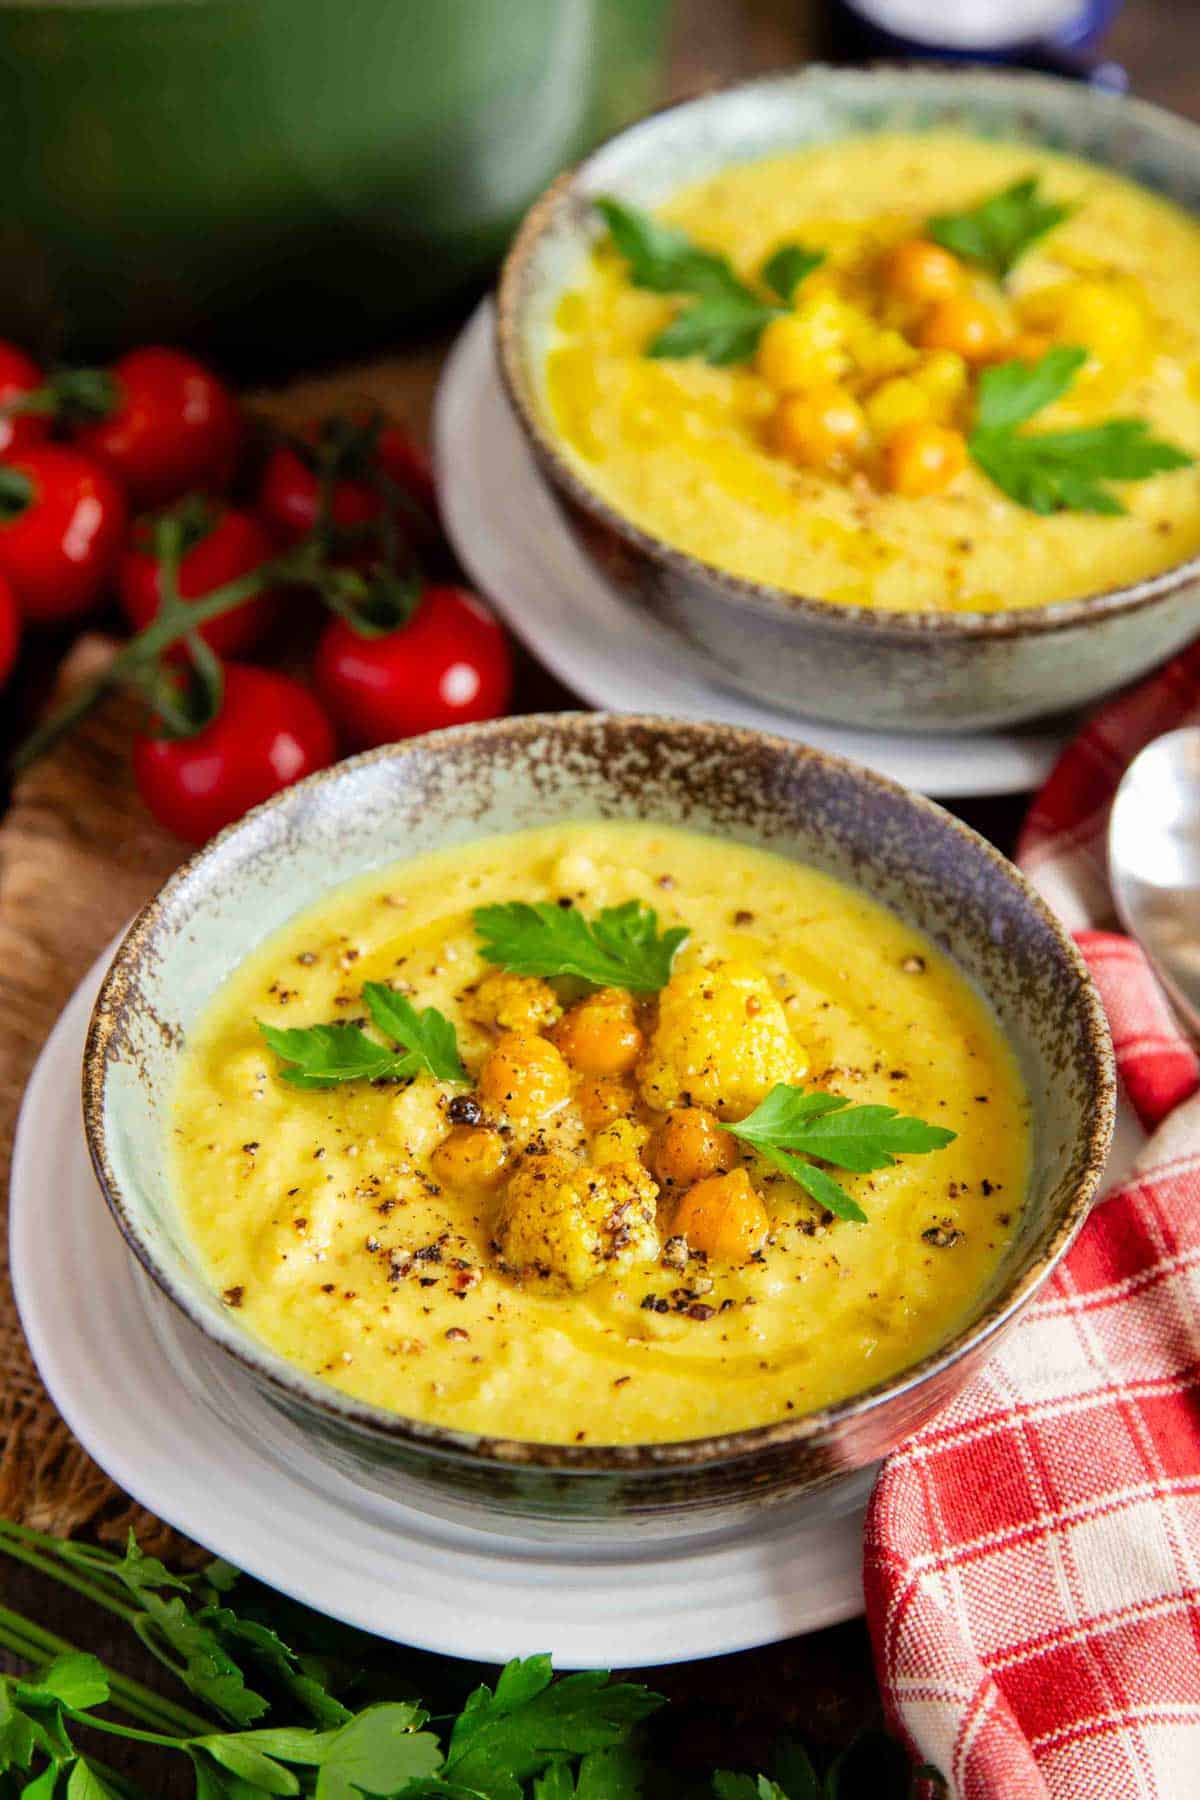 two bowls of golden soup garnished with chickpeas, cauliflower and fresh parsley